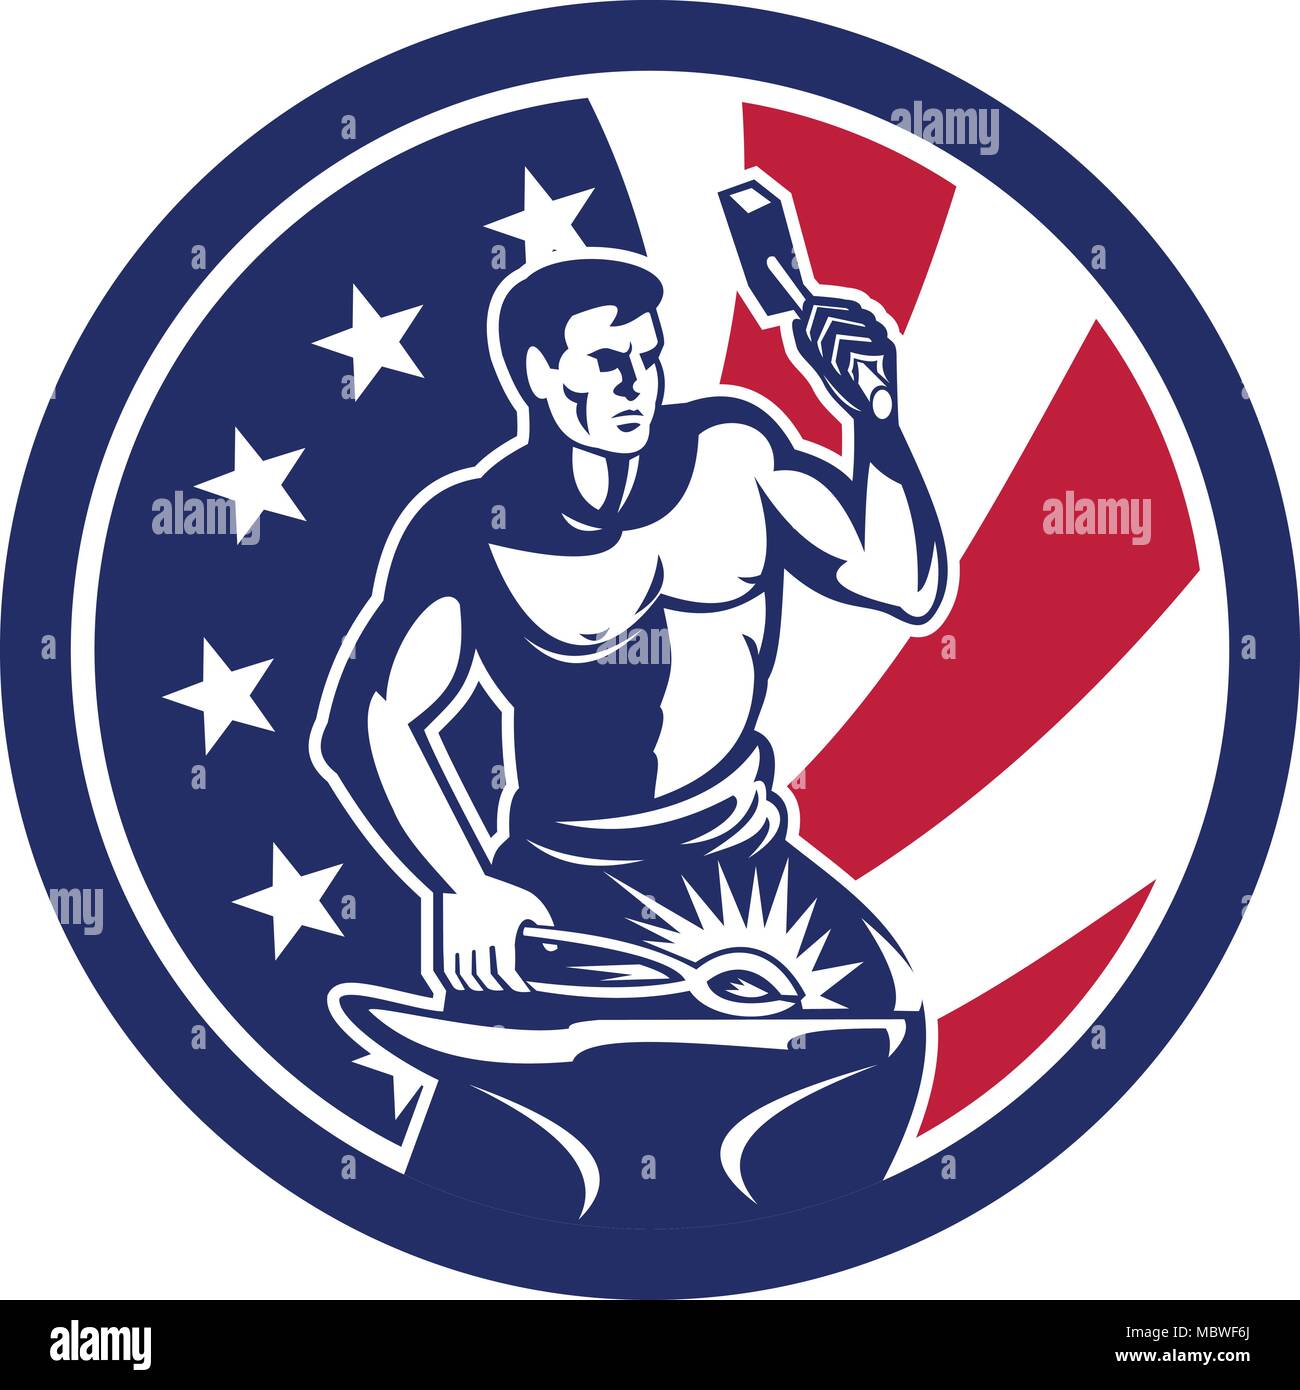 Icon retro style illustration of an American blacksmith or farrier holding hammer and anvil United States of America USA star spangled banner or stars Stock Vector